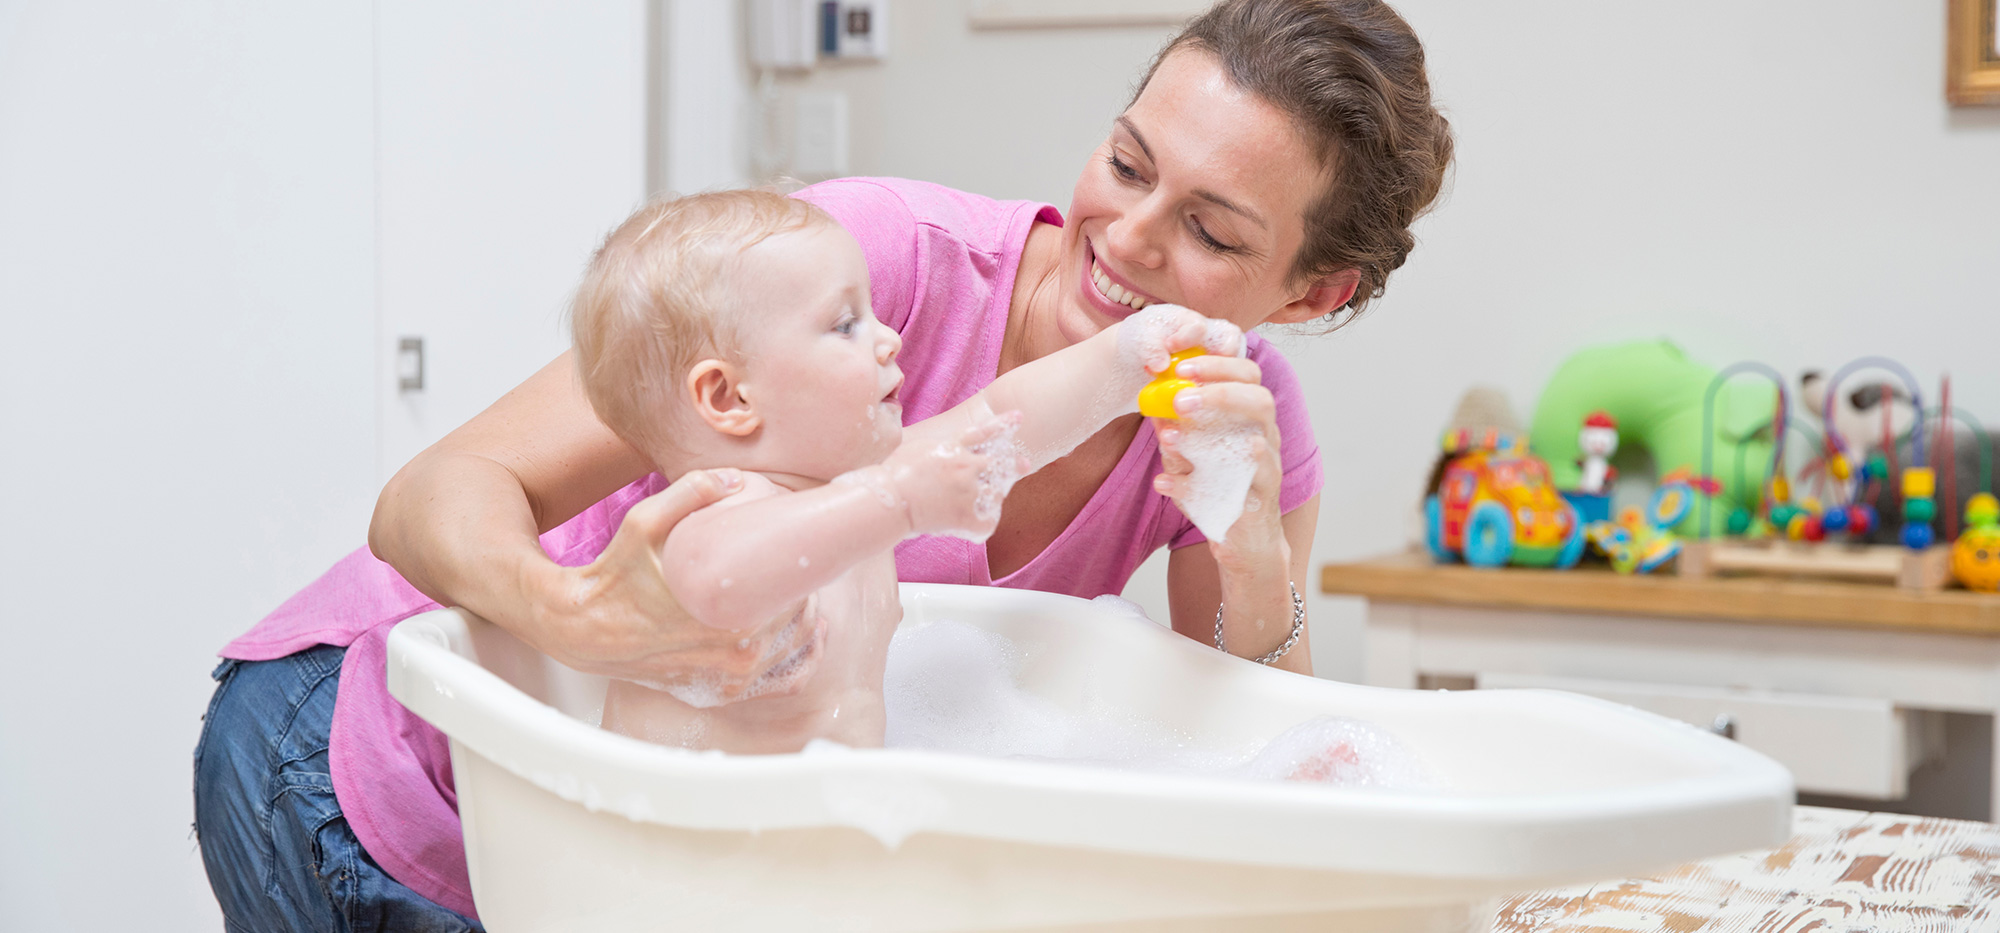 Bath time: How to bathe your baby